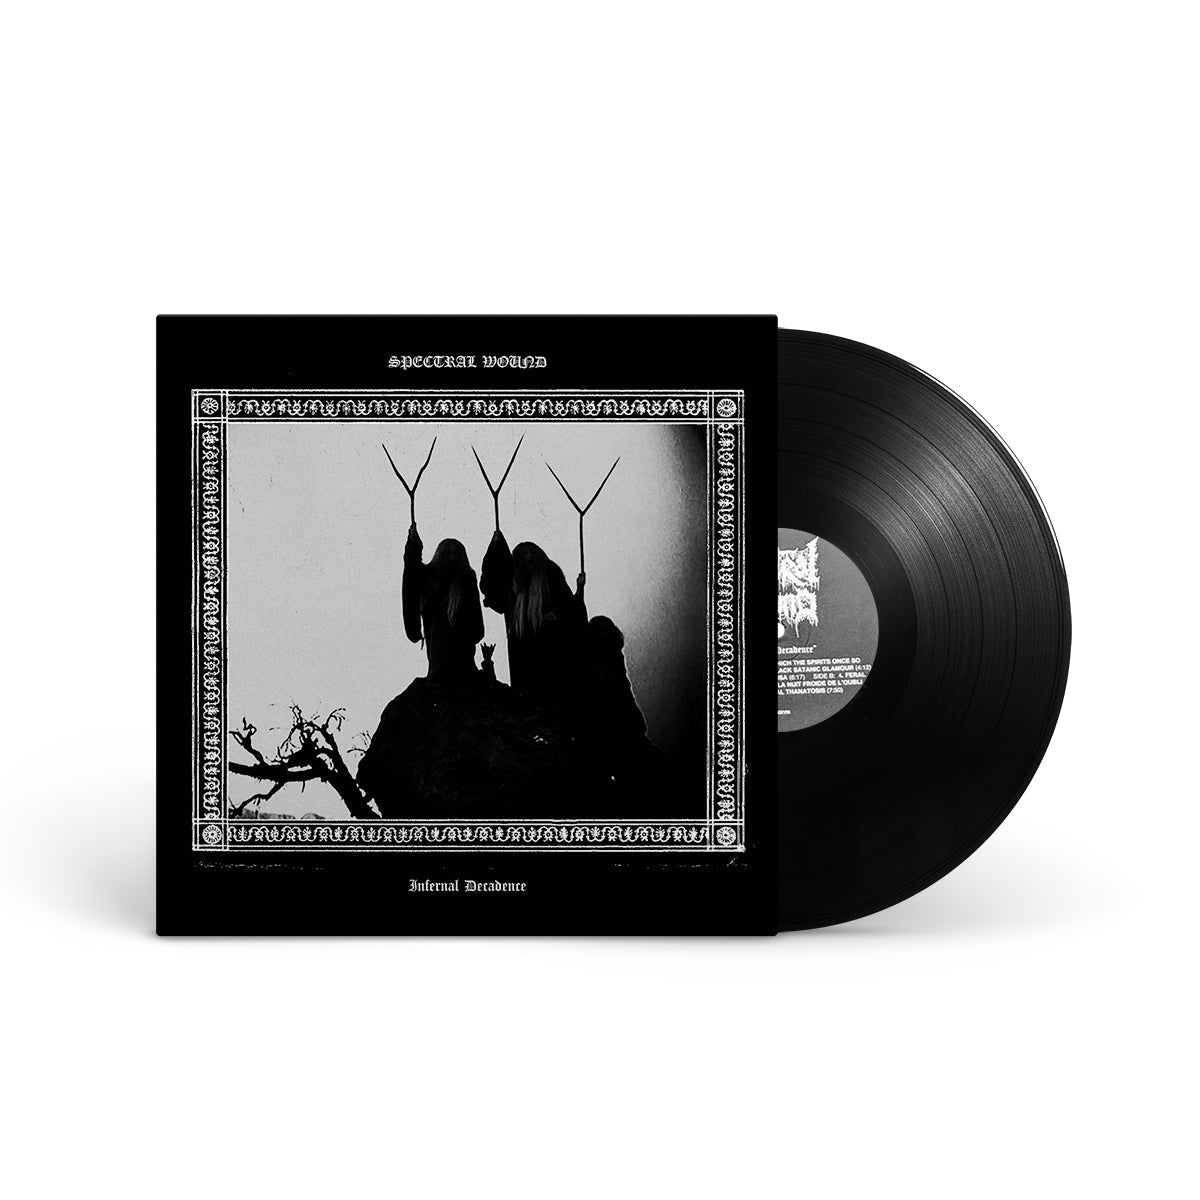 SPECTRAL WOUND "Infernal Decadence (Deluxe)" LP